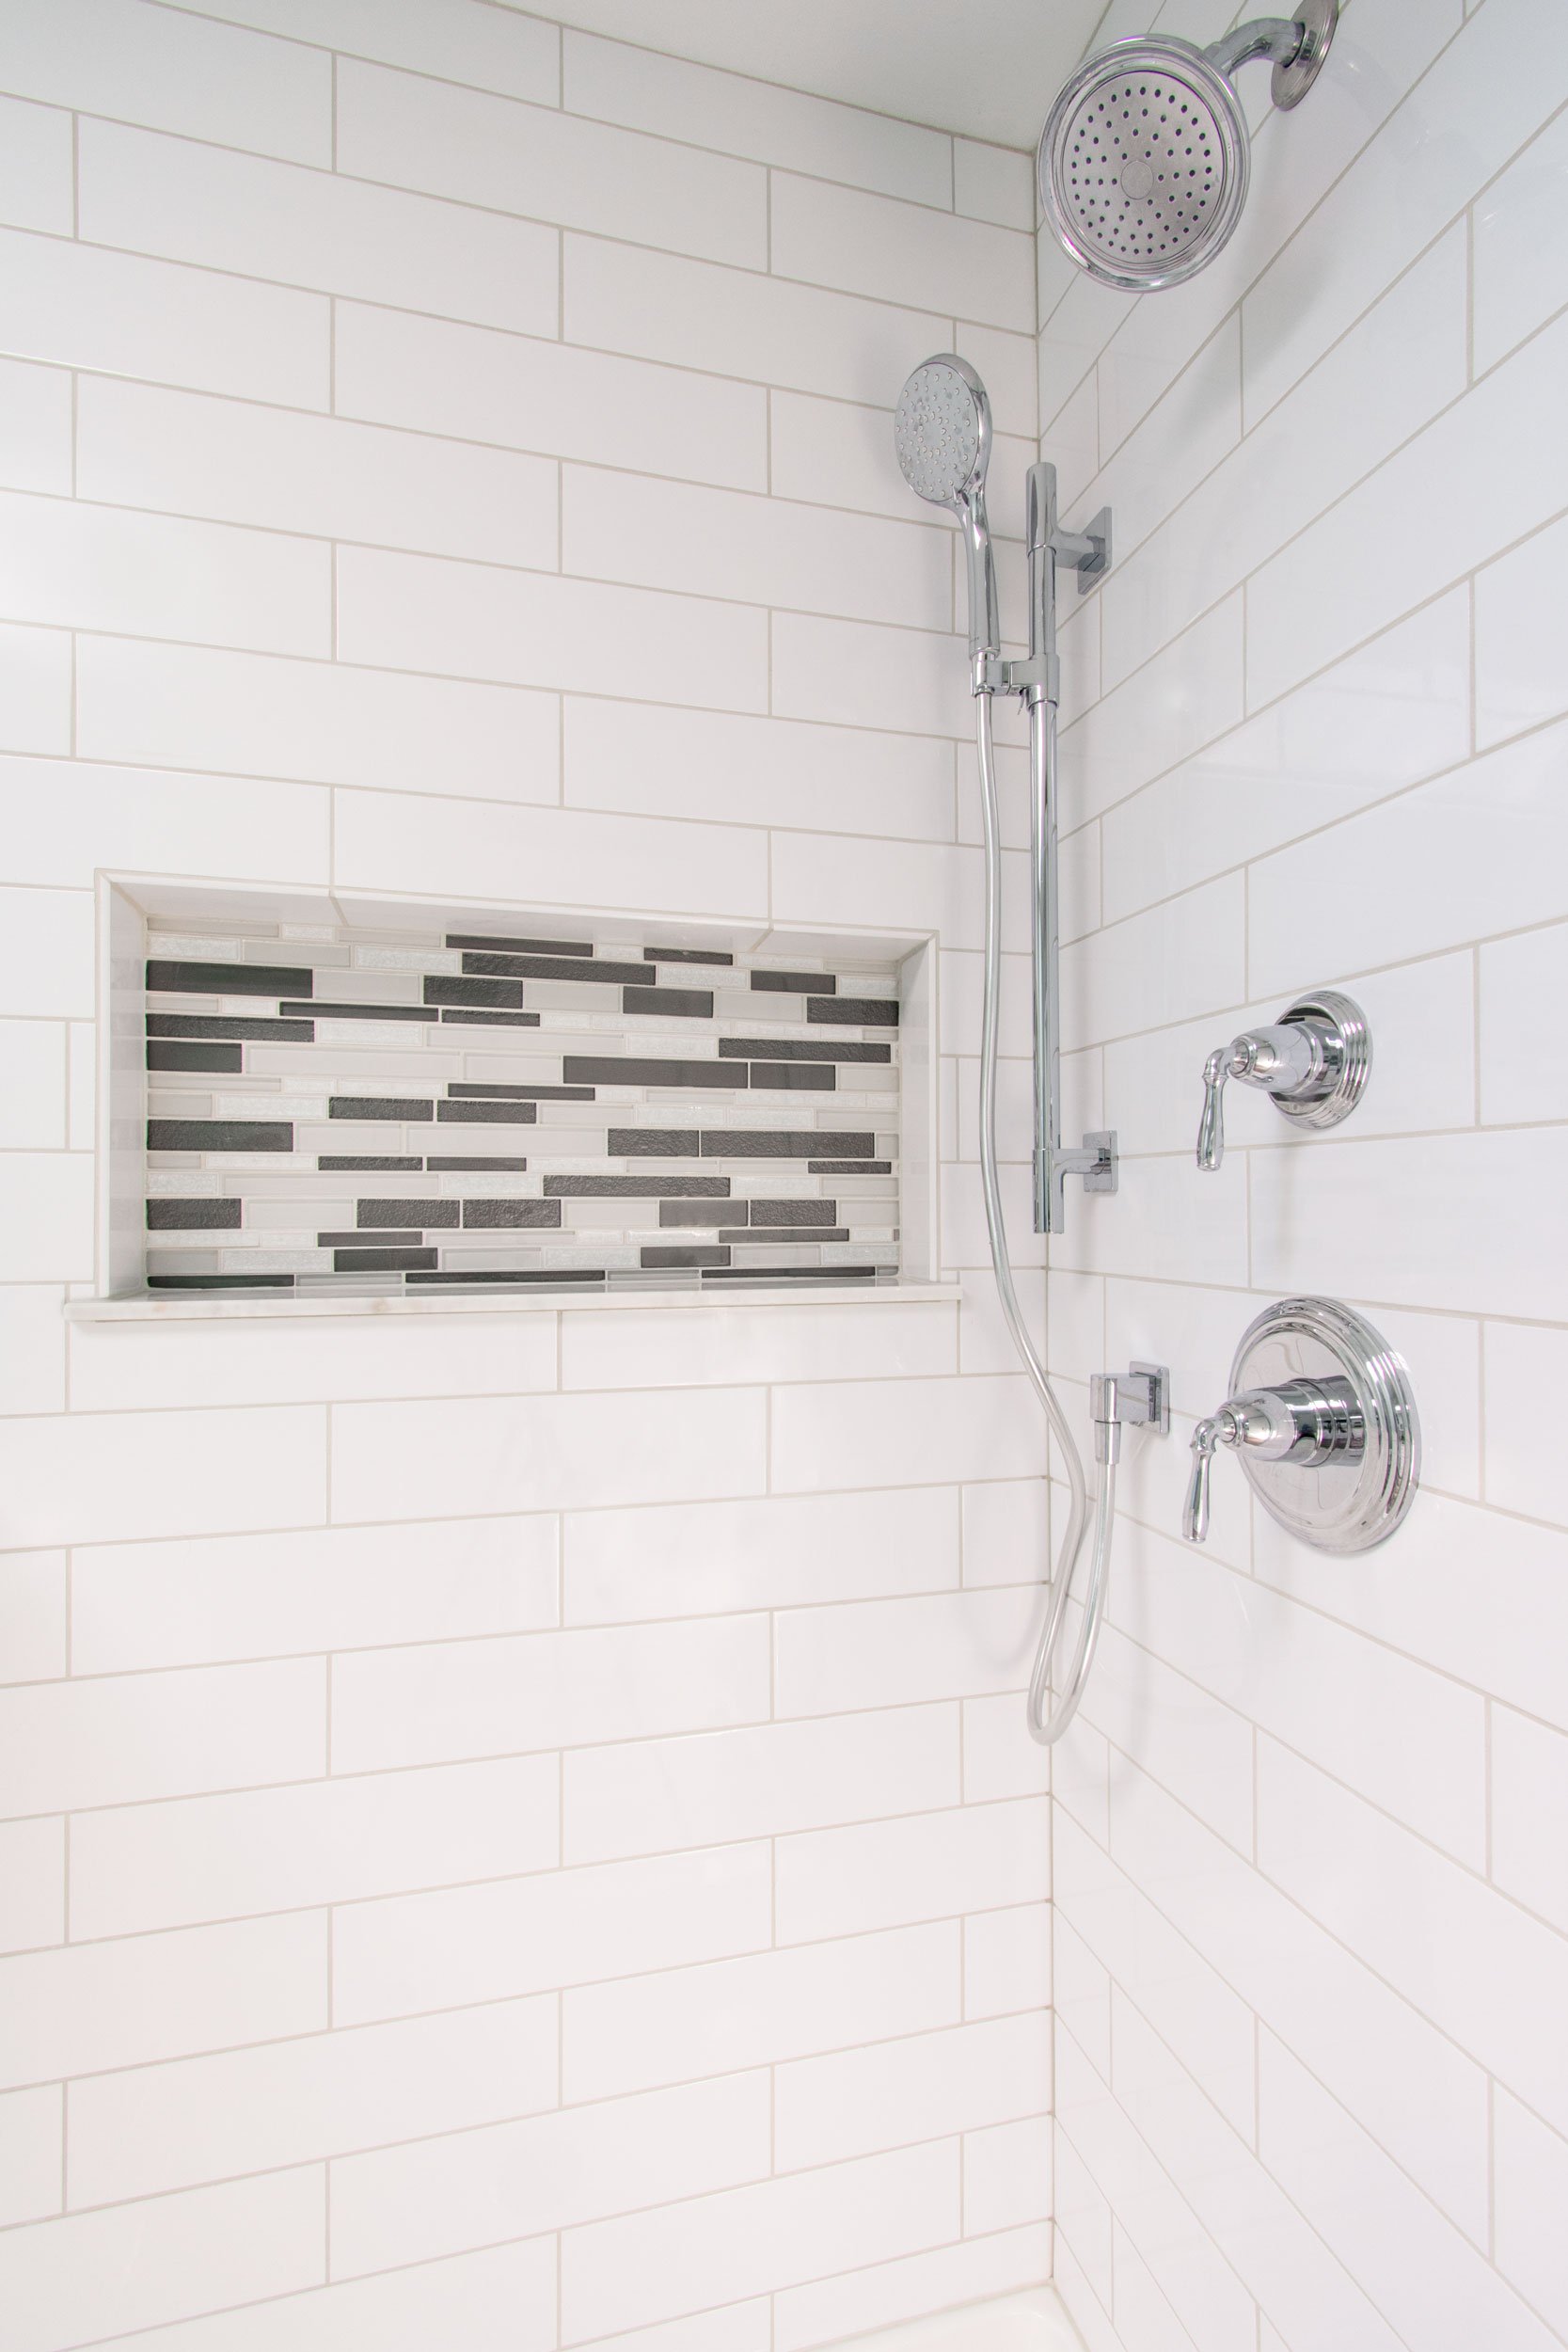 Bright and airy master bathroom with white subway tile